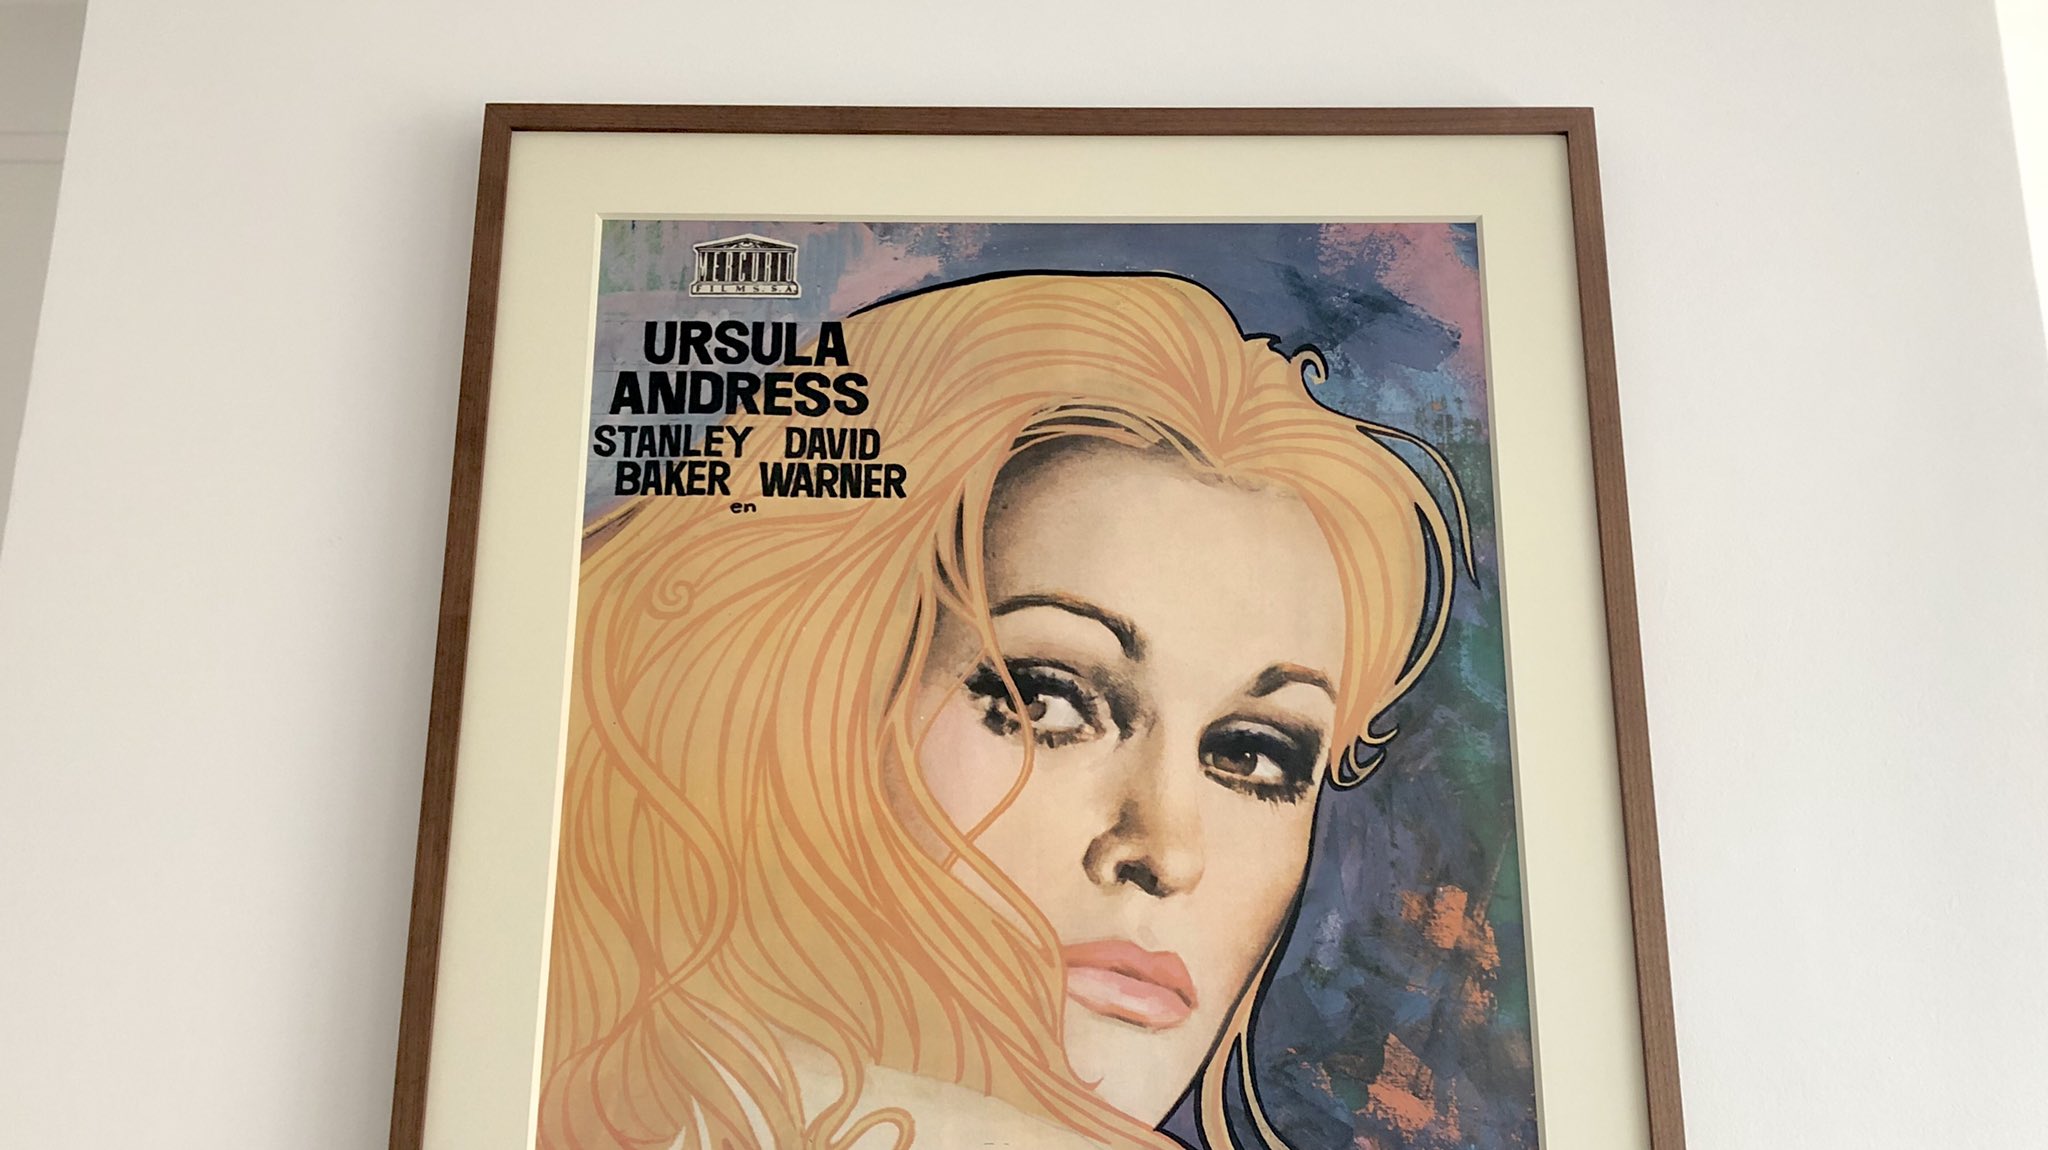 Happy Birthday to Ursula Andress... and here she is looking down at me from above the fireplace as usual 